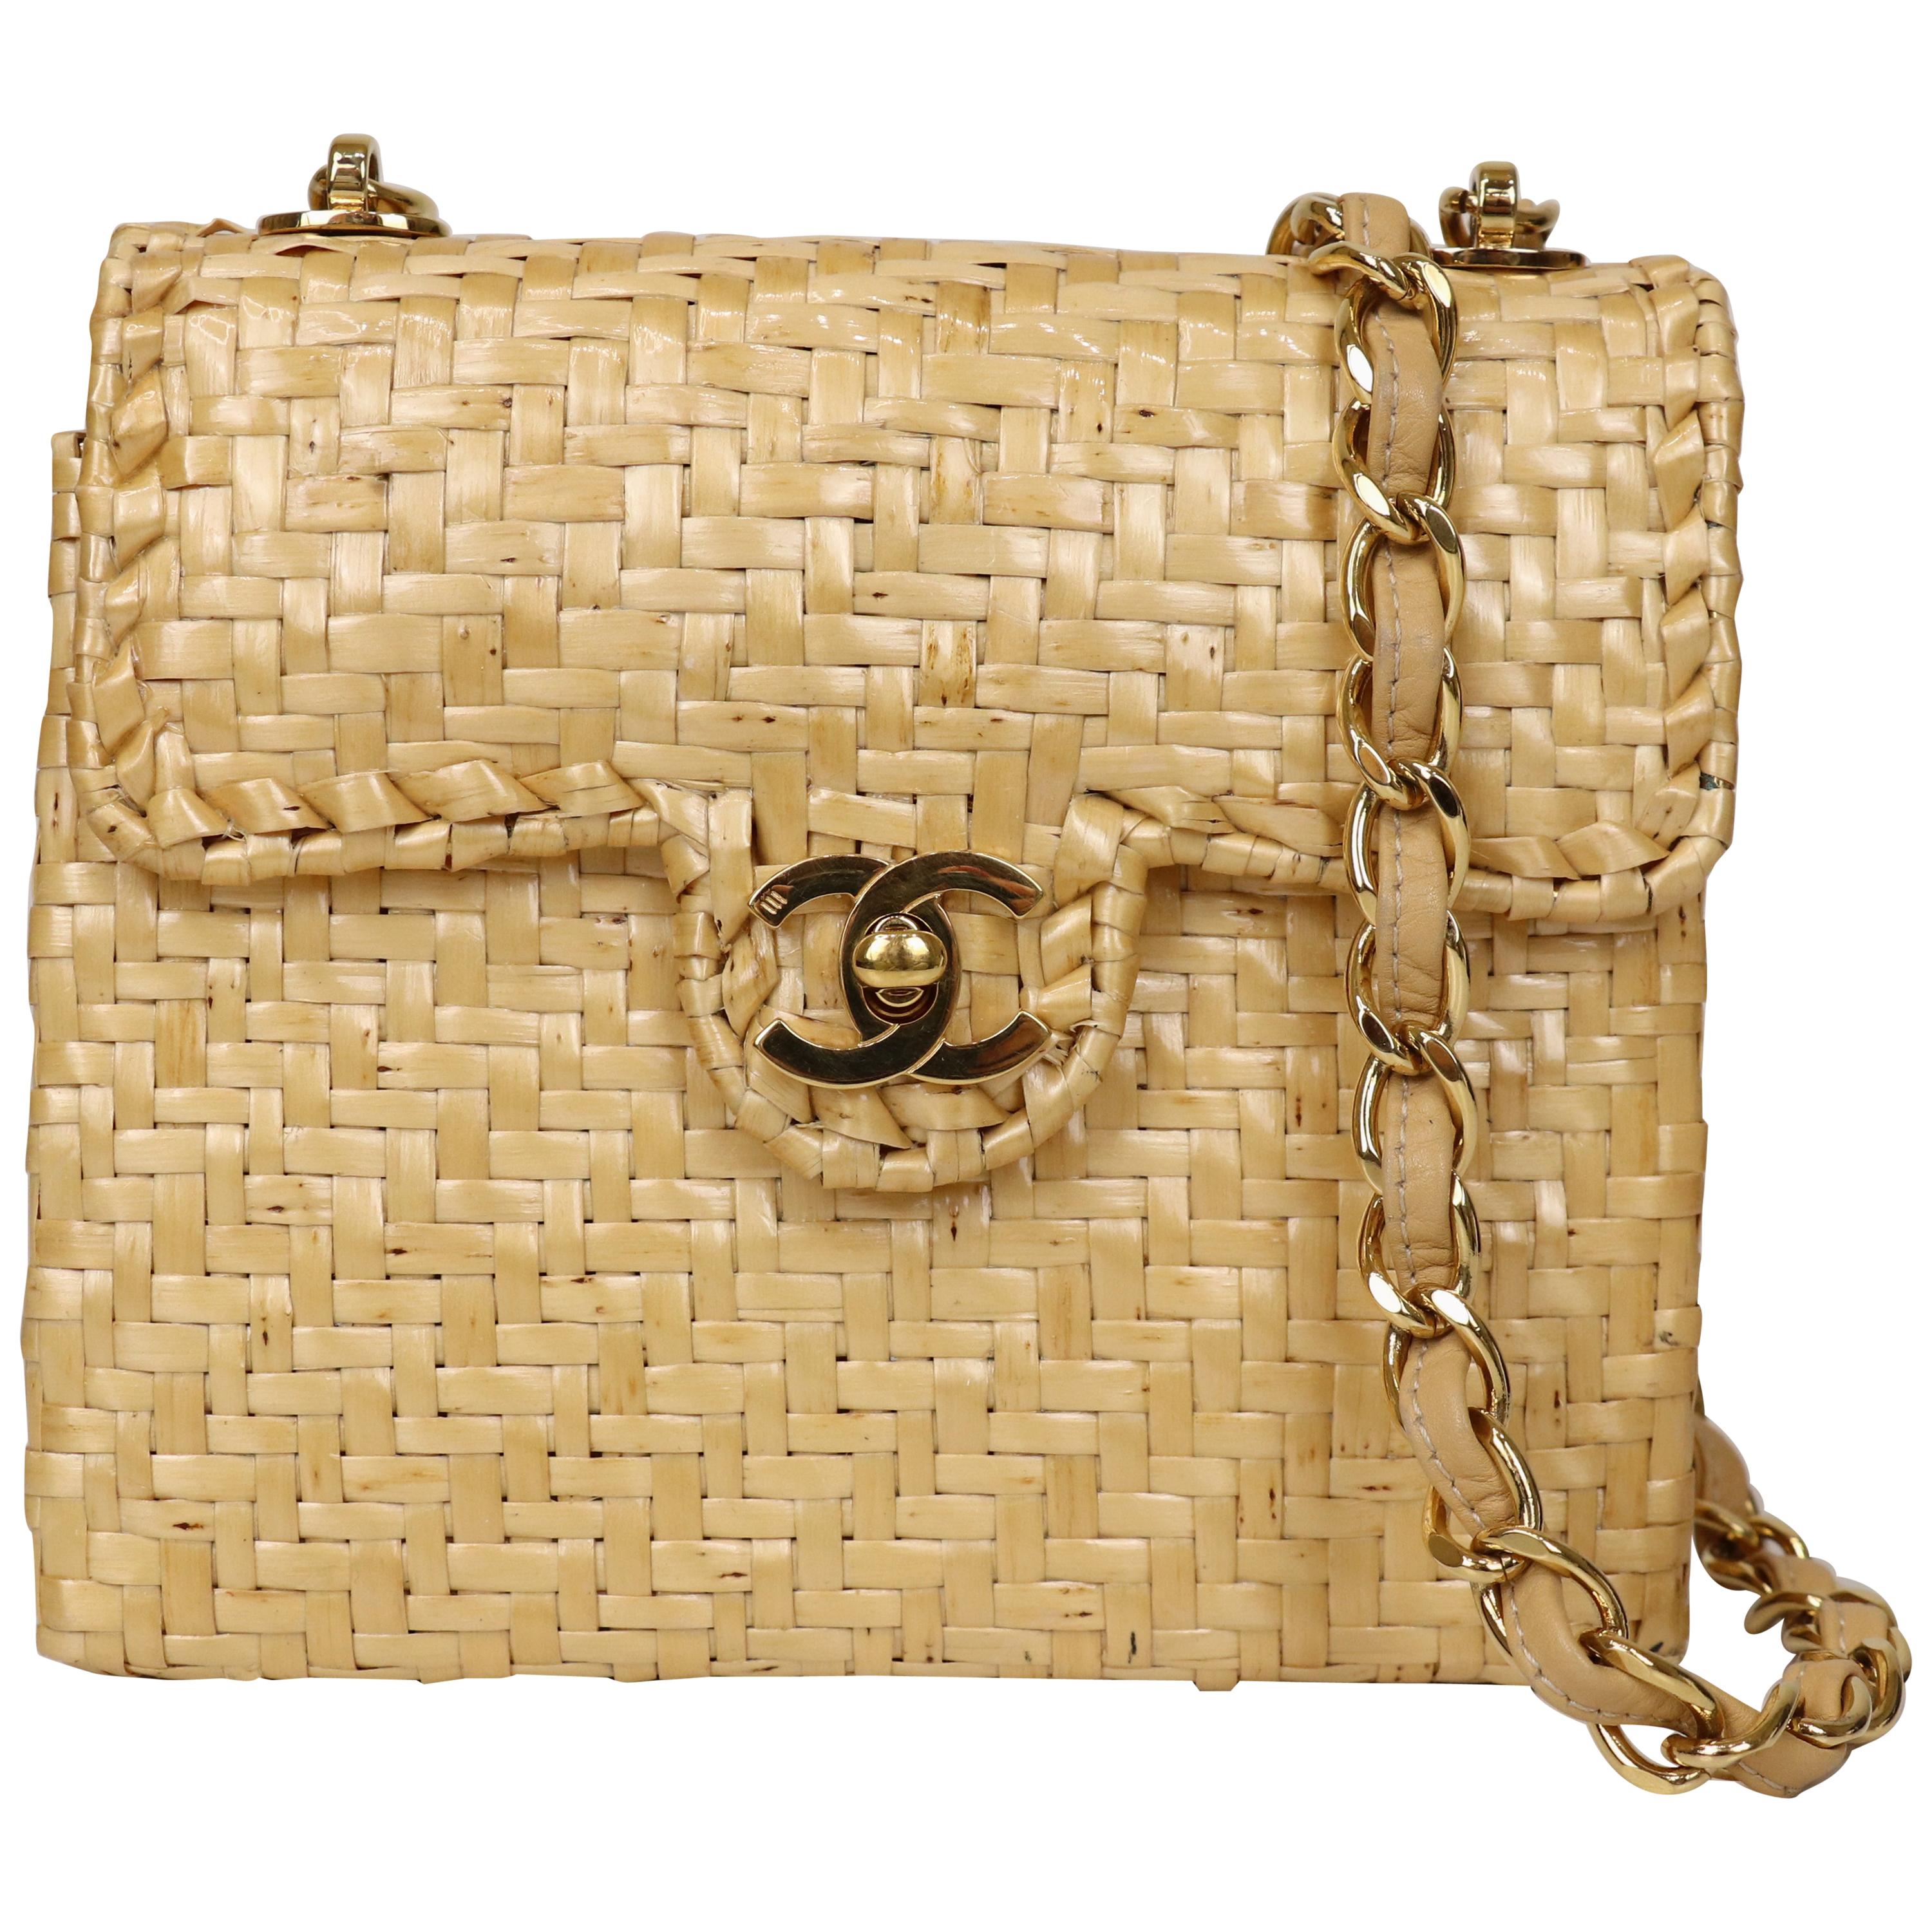 CHANEL, WICKER RATTAN WITH GOLD-TONE METAL CLASSIC SHOULDER BAG, Chanel:  Handbags and Accessories, 2020